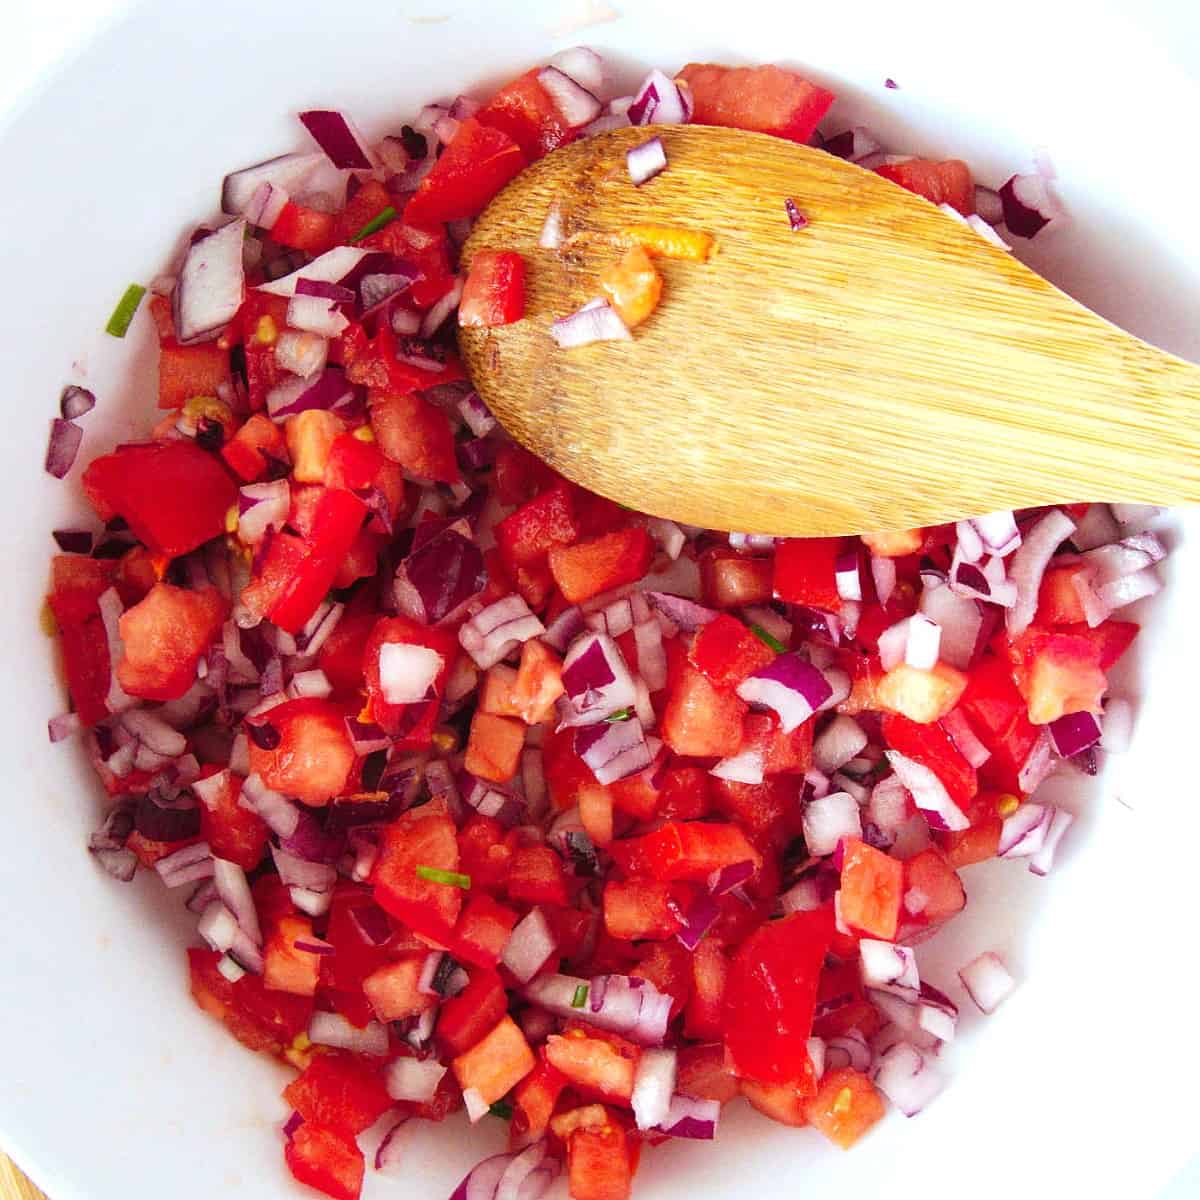 Looking down in a bowl of the first mixed ingredients, red onion and tomatoes.